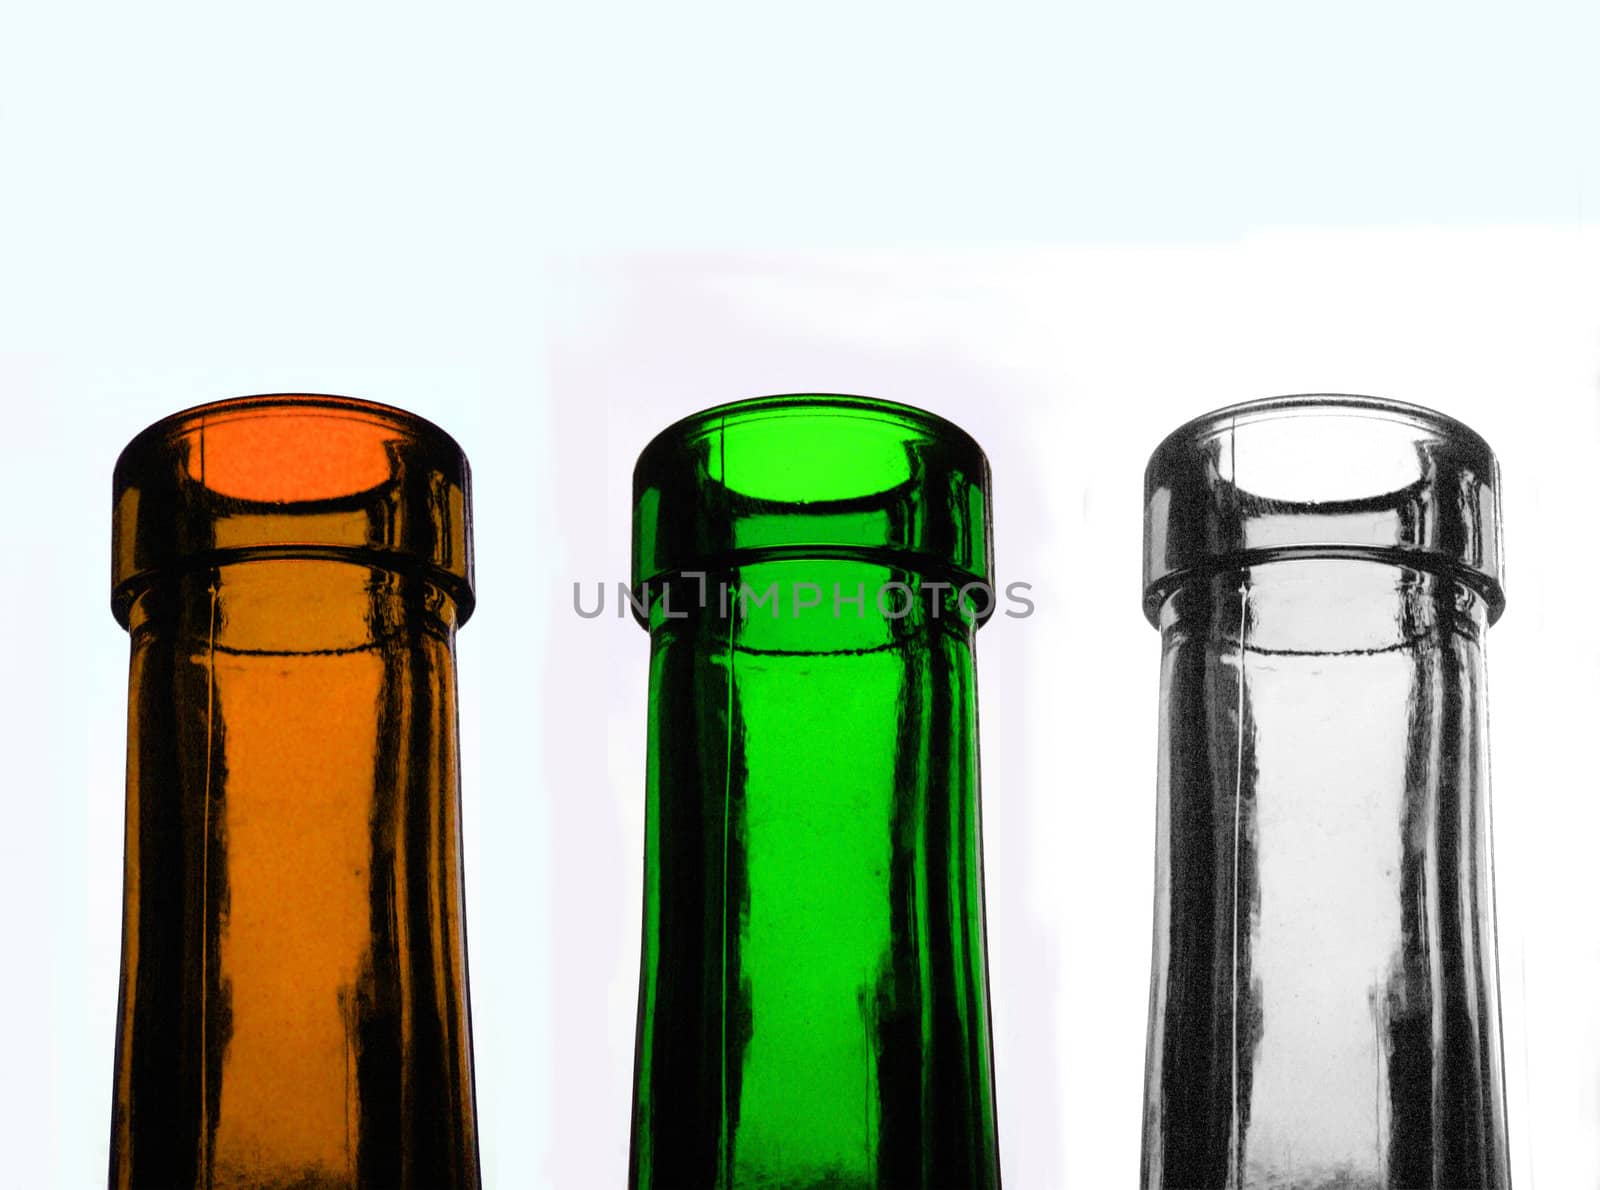 Recycable glass bottles by ommo